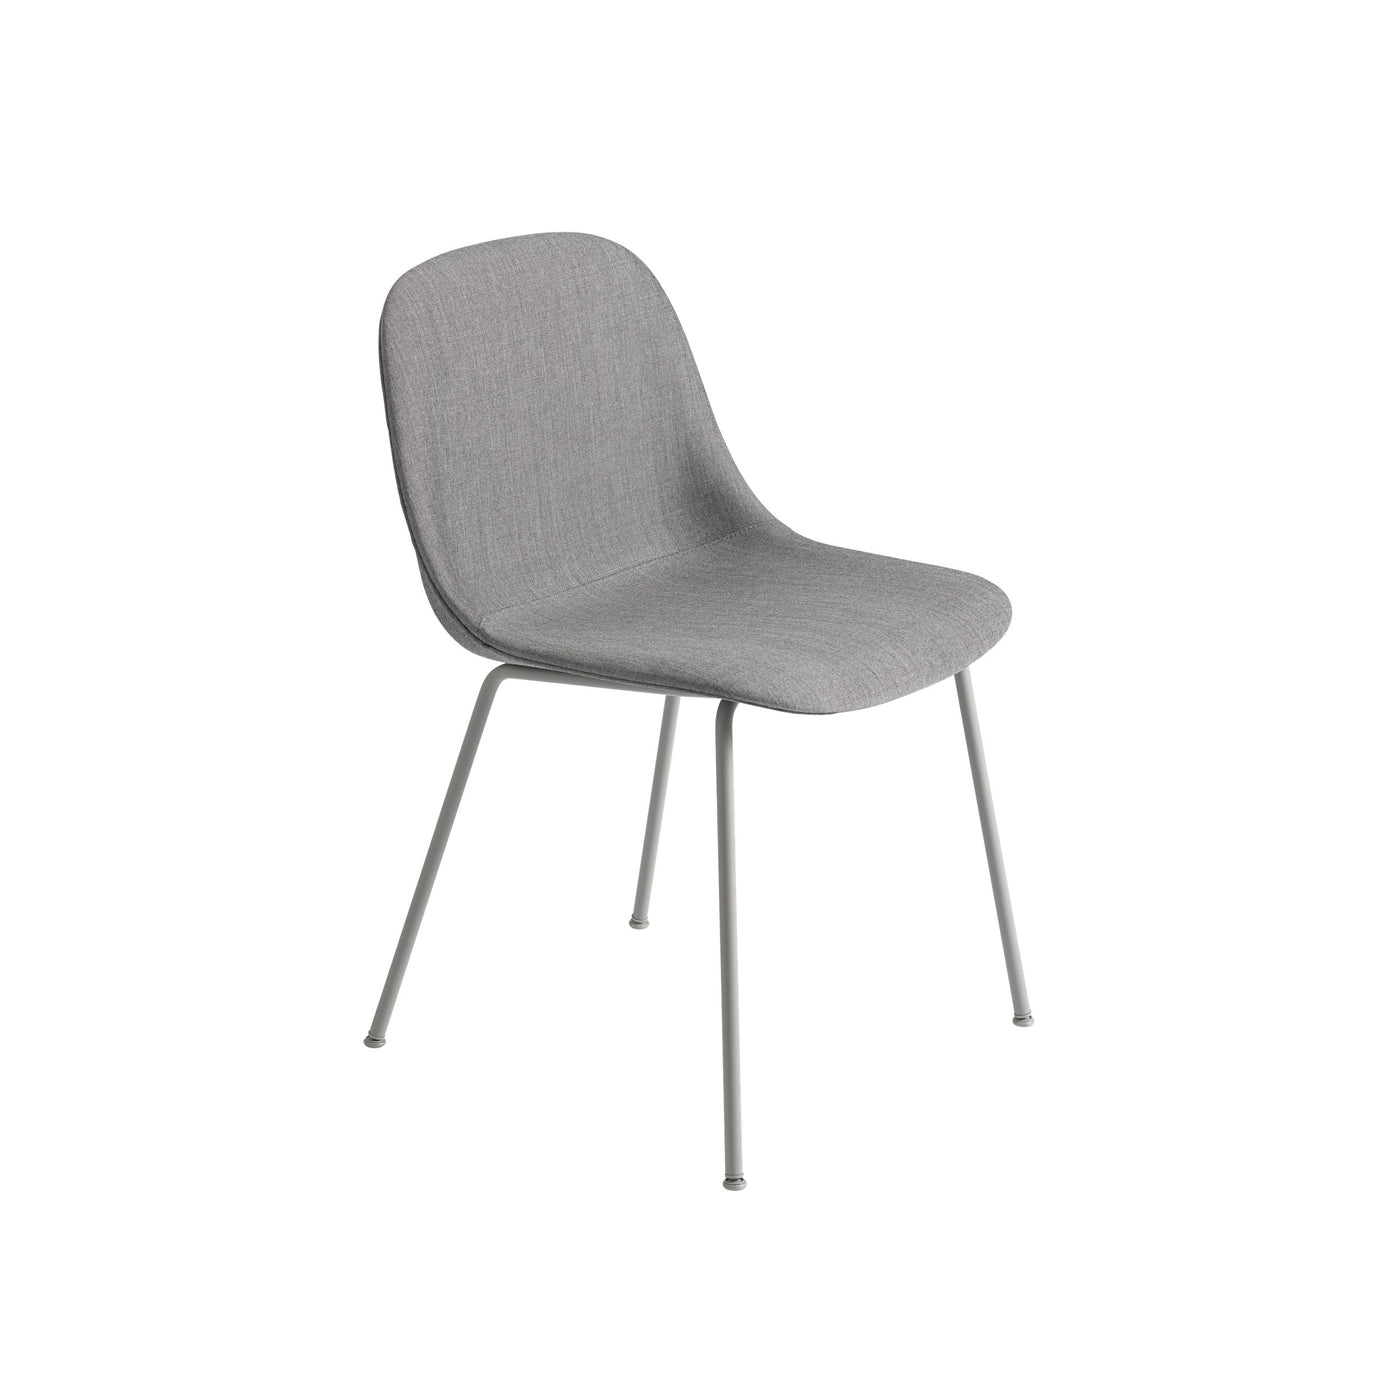 Muuto Fiber Side Chair Tube Base, remix 133 seat and grey legs. Available from someday designs. #colour_remix-133